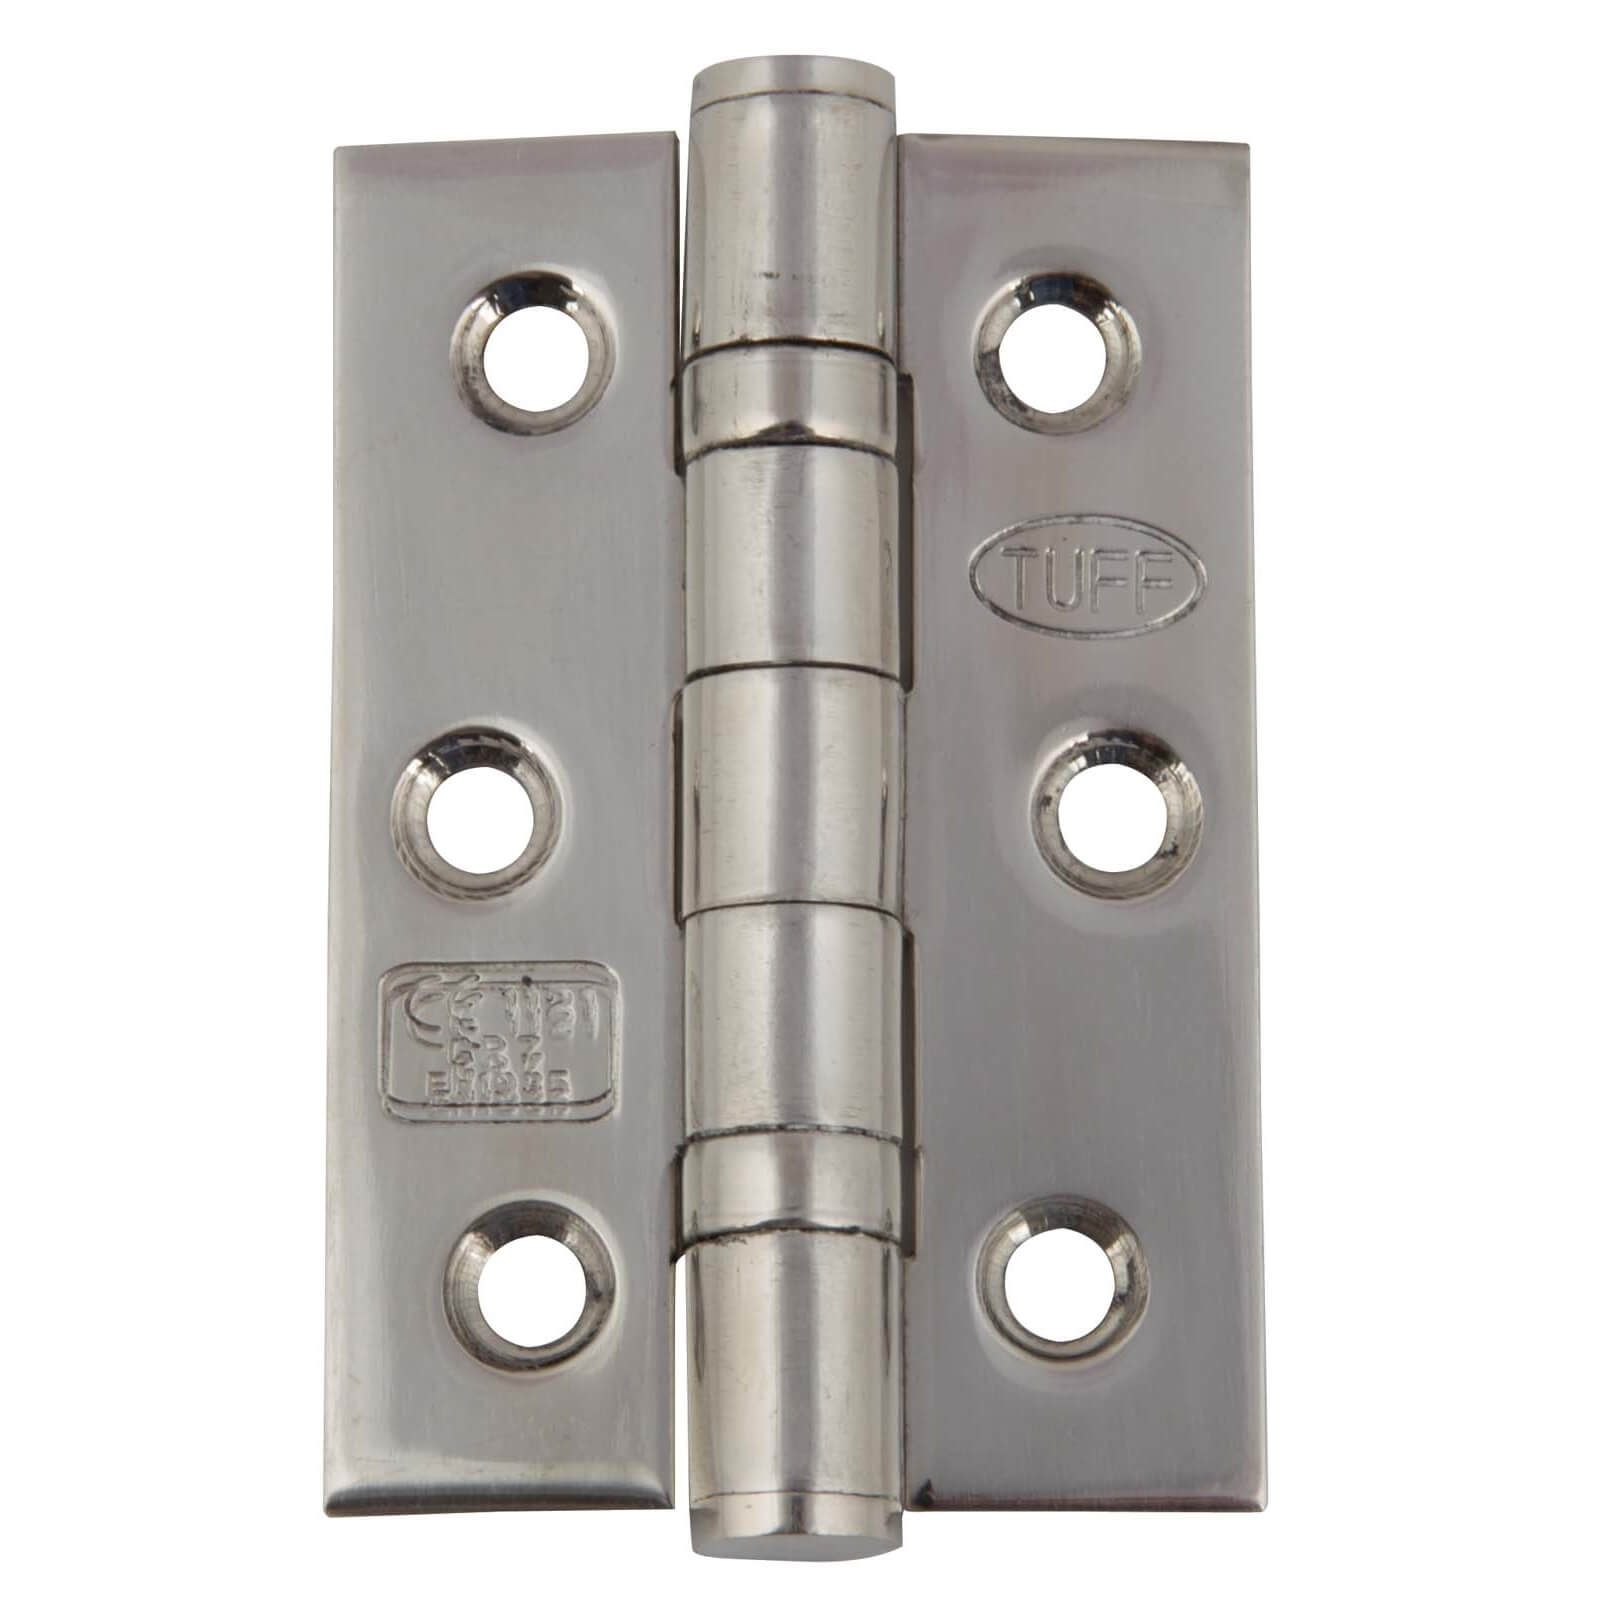 Hafele Grade 7 Butt Hinge - Polished Stainless Steel - 76 x 51mm - 2 Pack